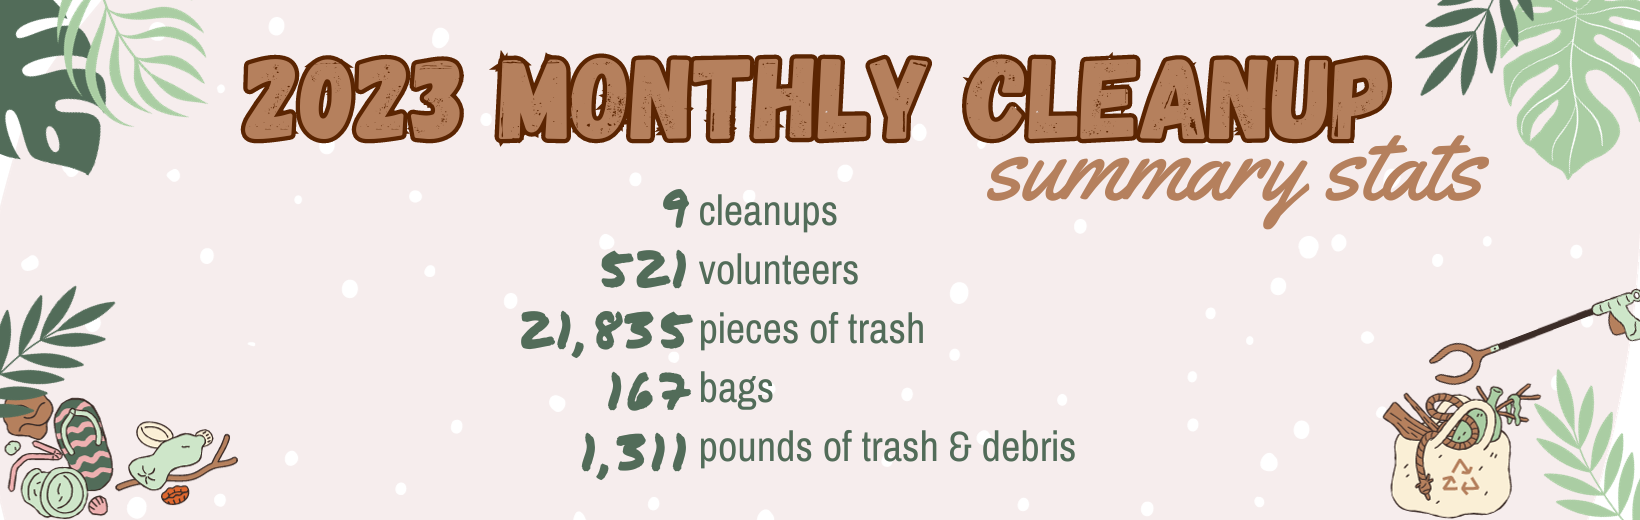 image of cleanup stats